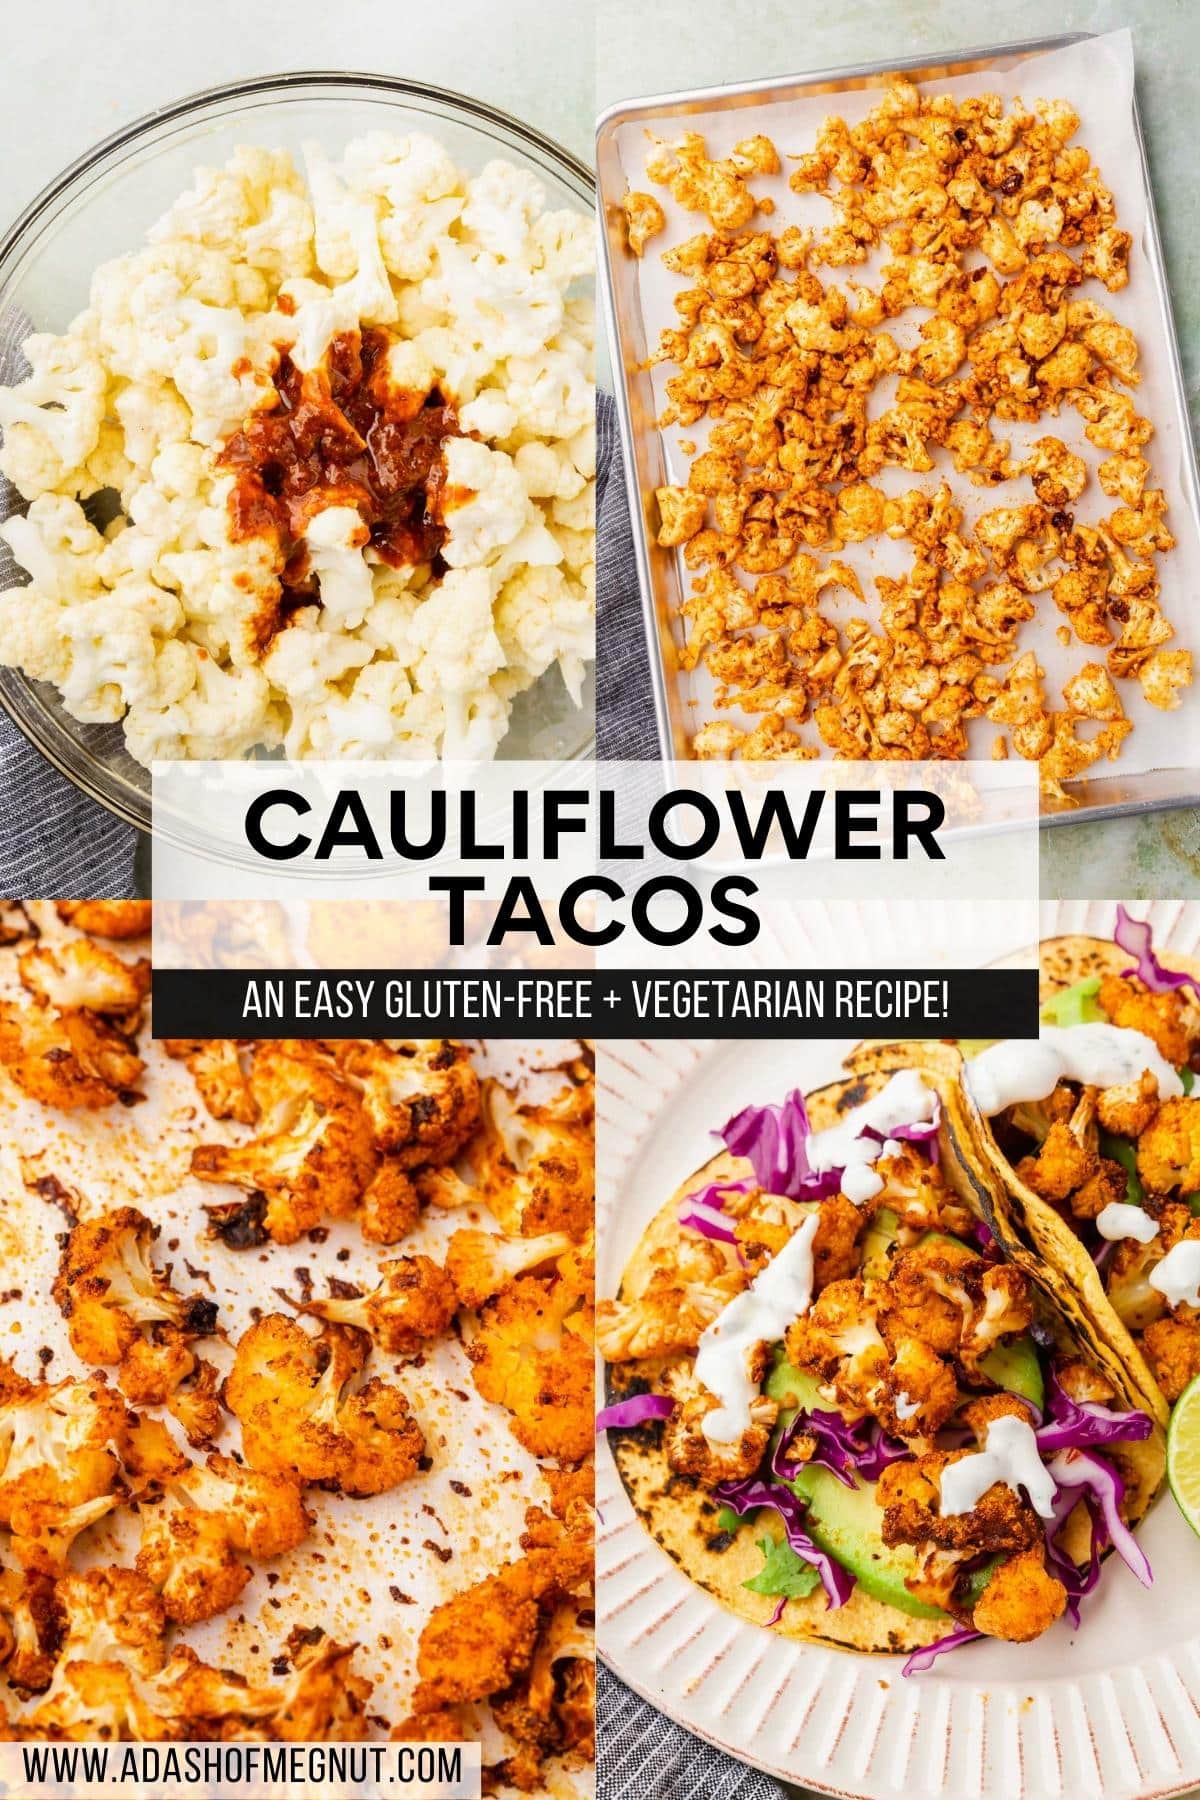 A four photo collage showing the process of making roasted cauliflower tacos from tossing the cauliflower with spices in a bowl, placing on a baking sheet, roasting in the oven, to assembling the tacos with avocado, cabbage and sour cream.